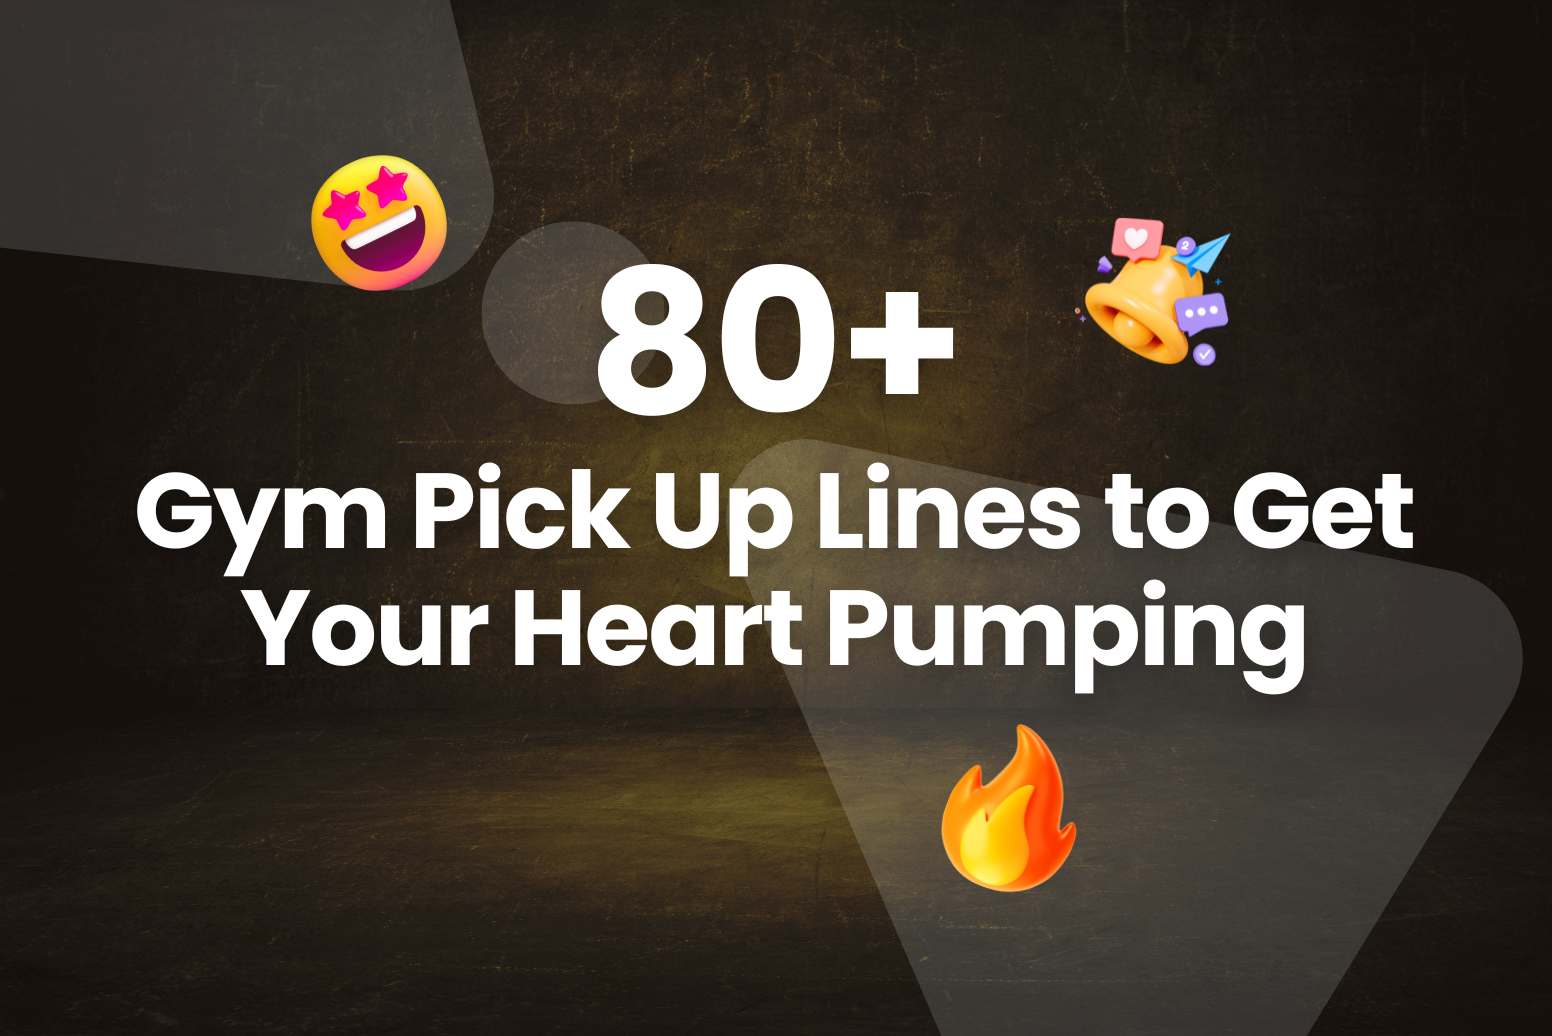 Gym pick up lines